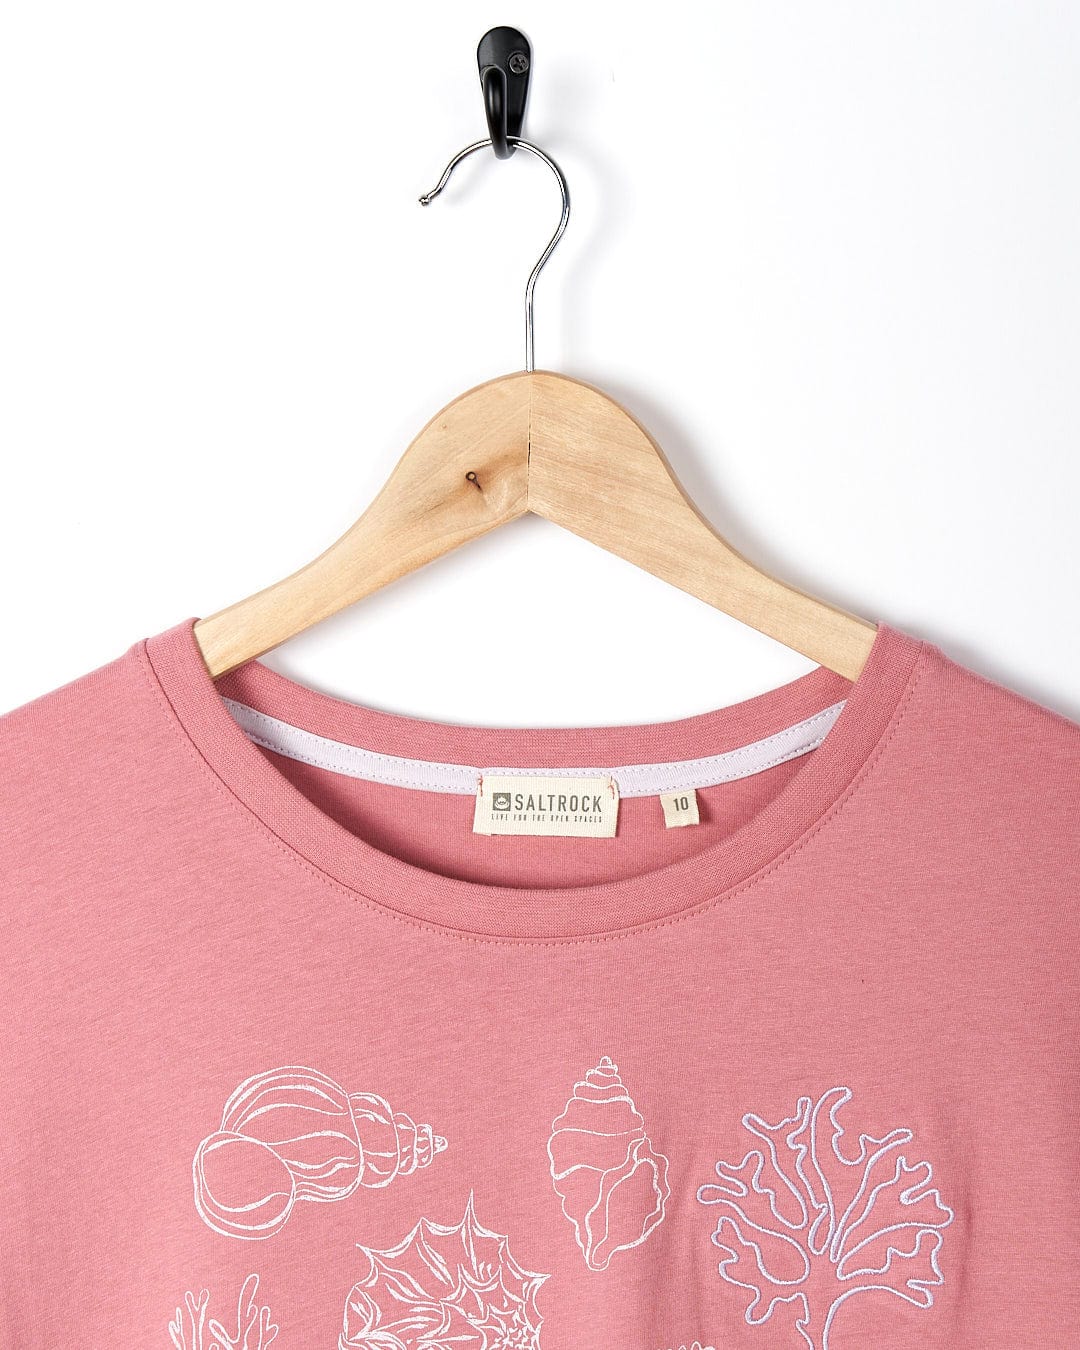 A Saltrock Sea Shells - Womens Relaxed Fit T-Shirt - Mid Pink with sea creatures on it.